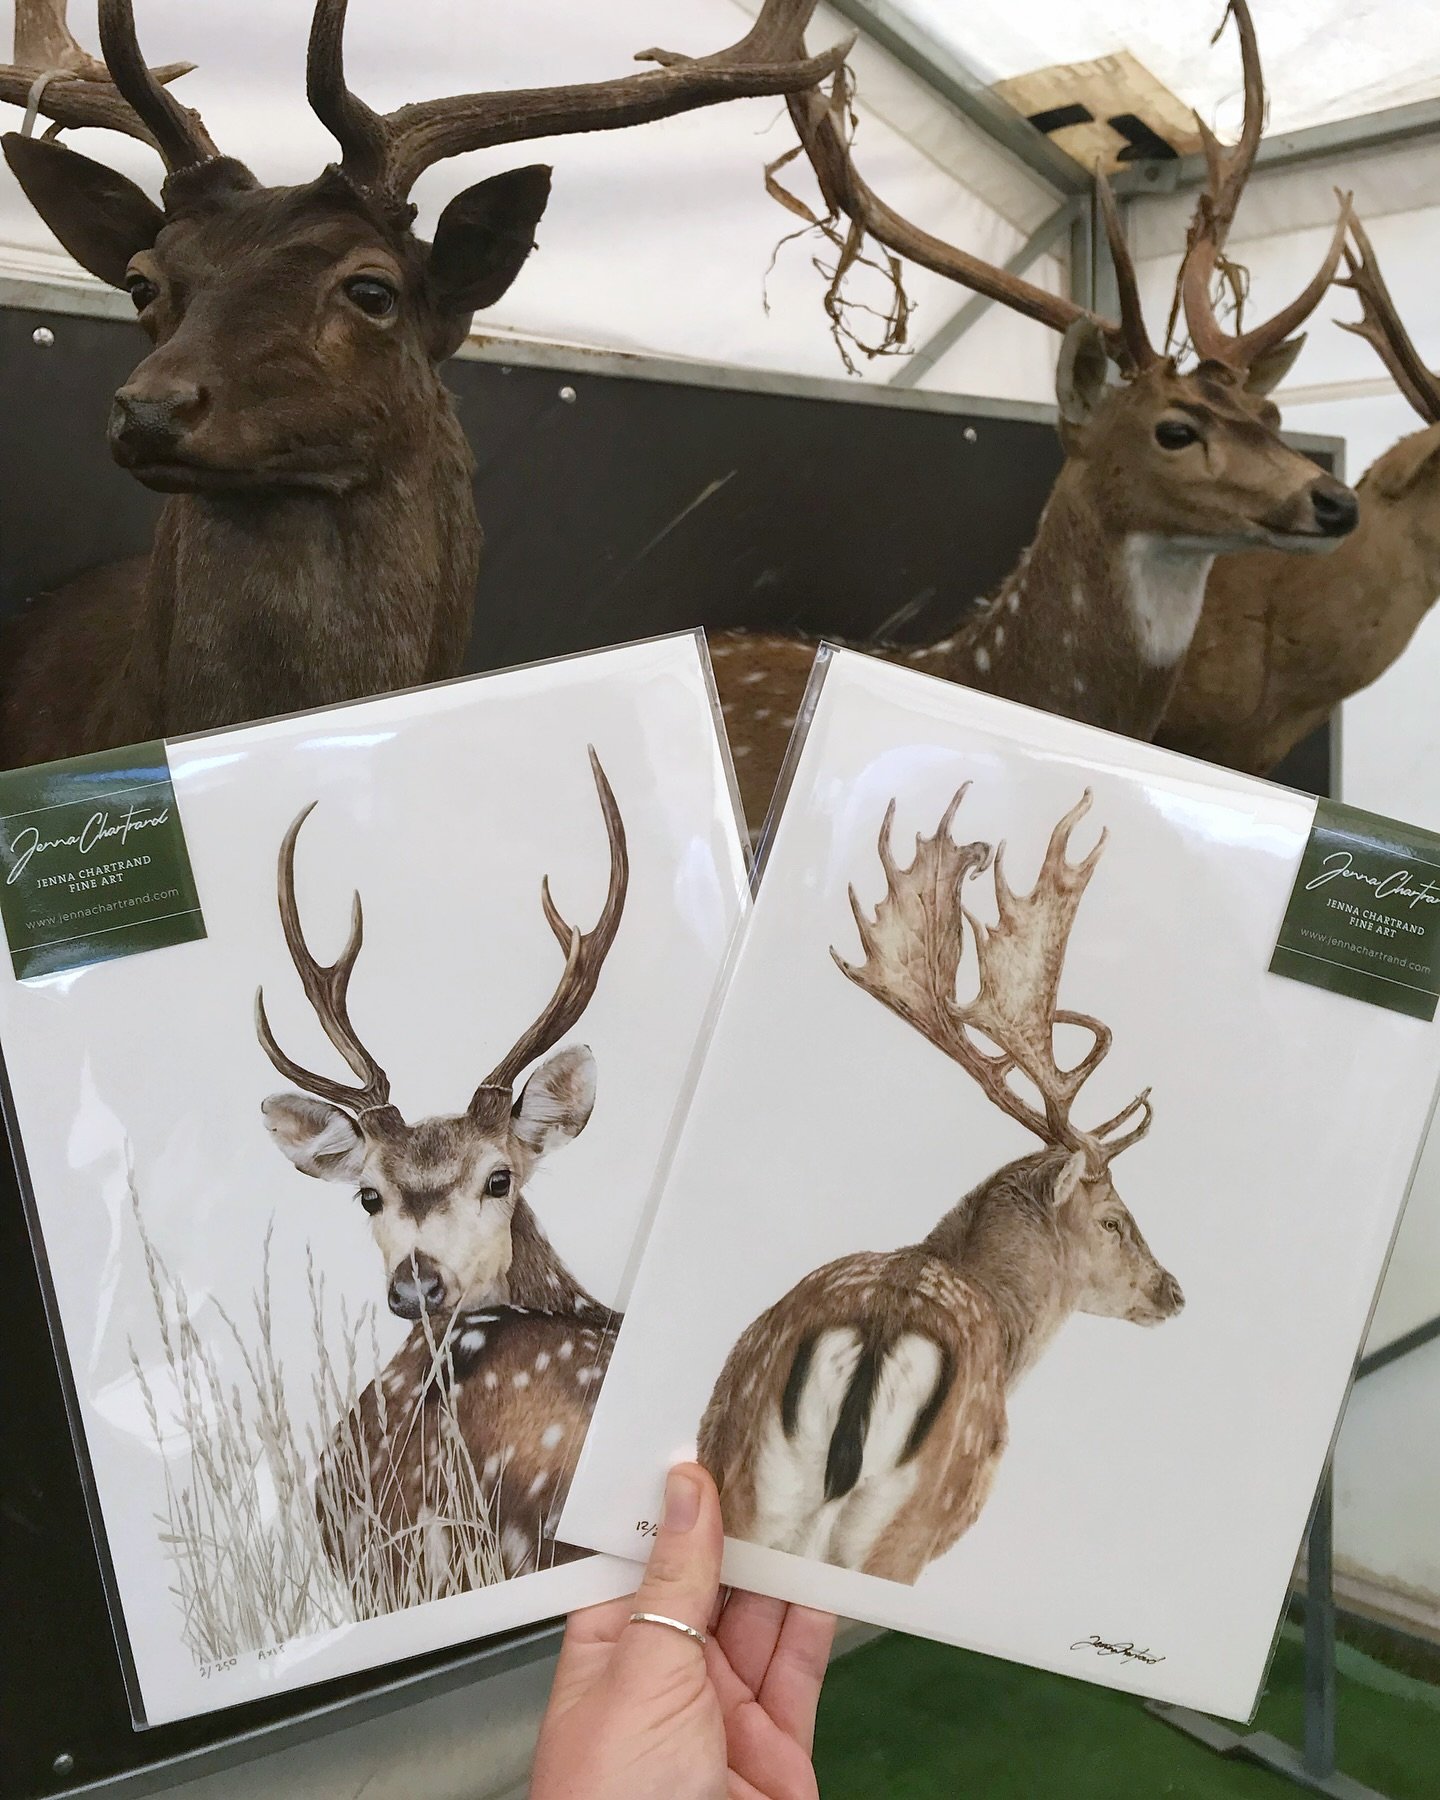 Went for a wander down to the @australiandeer tent across the road  from me with a couple of my coloured pencil stag limited edition prints 🦌 

I think they look pretty good together, what do you think?